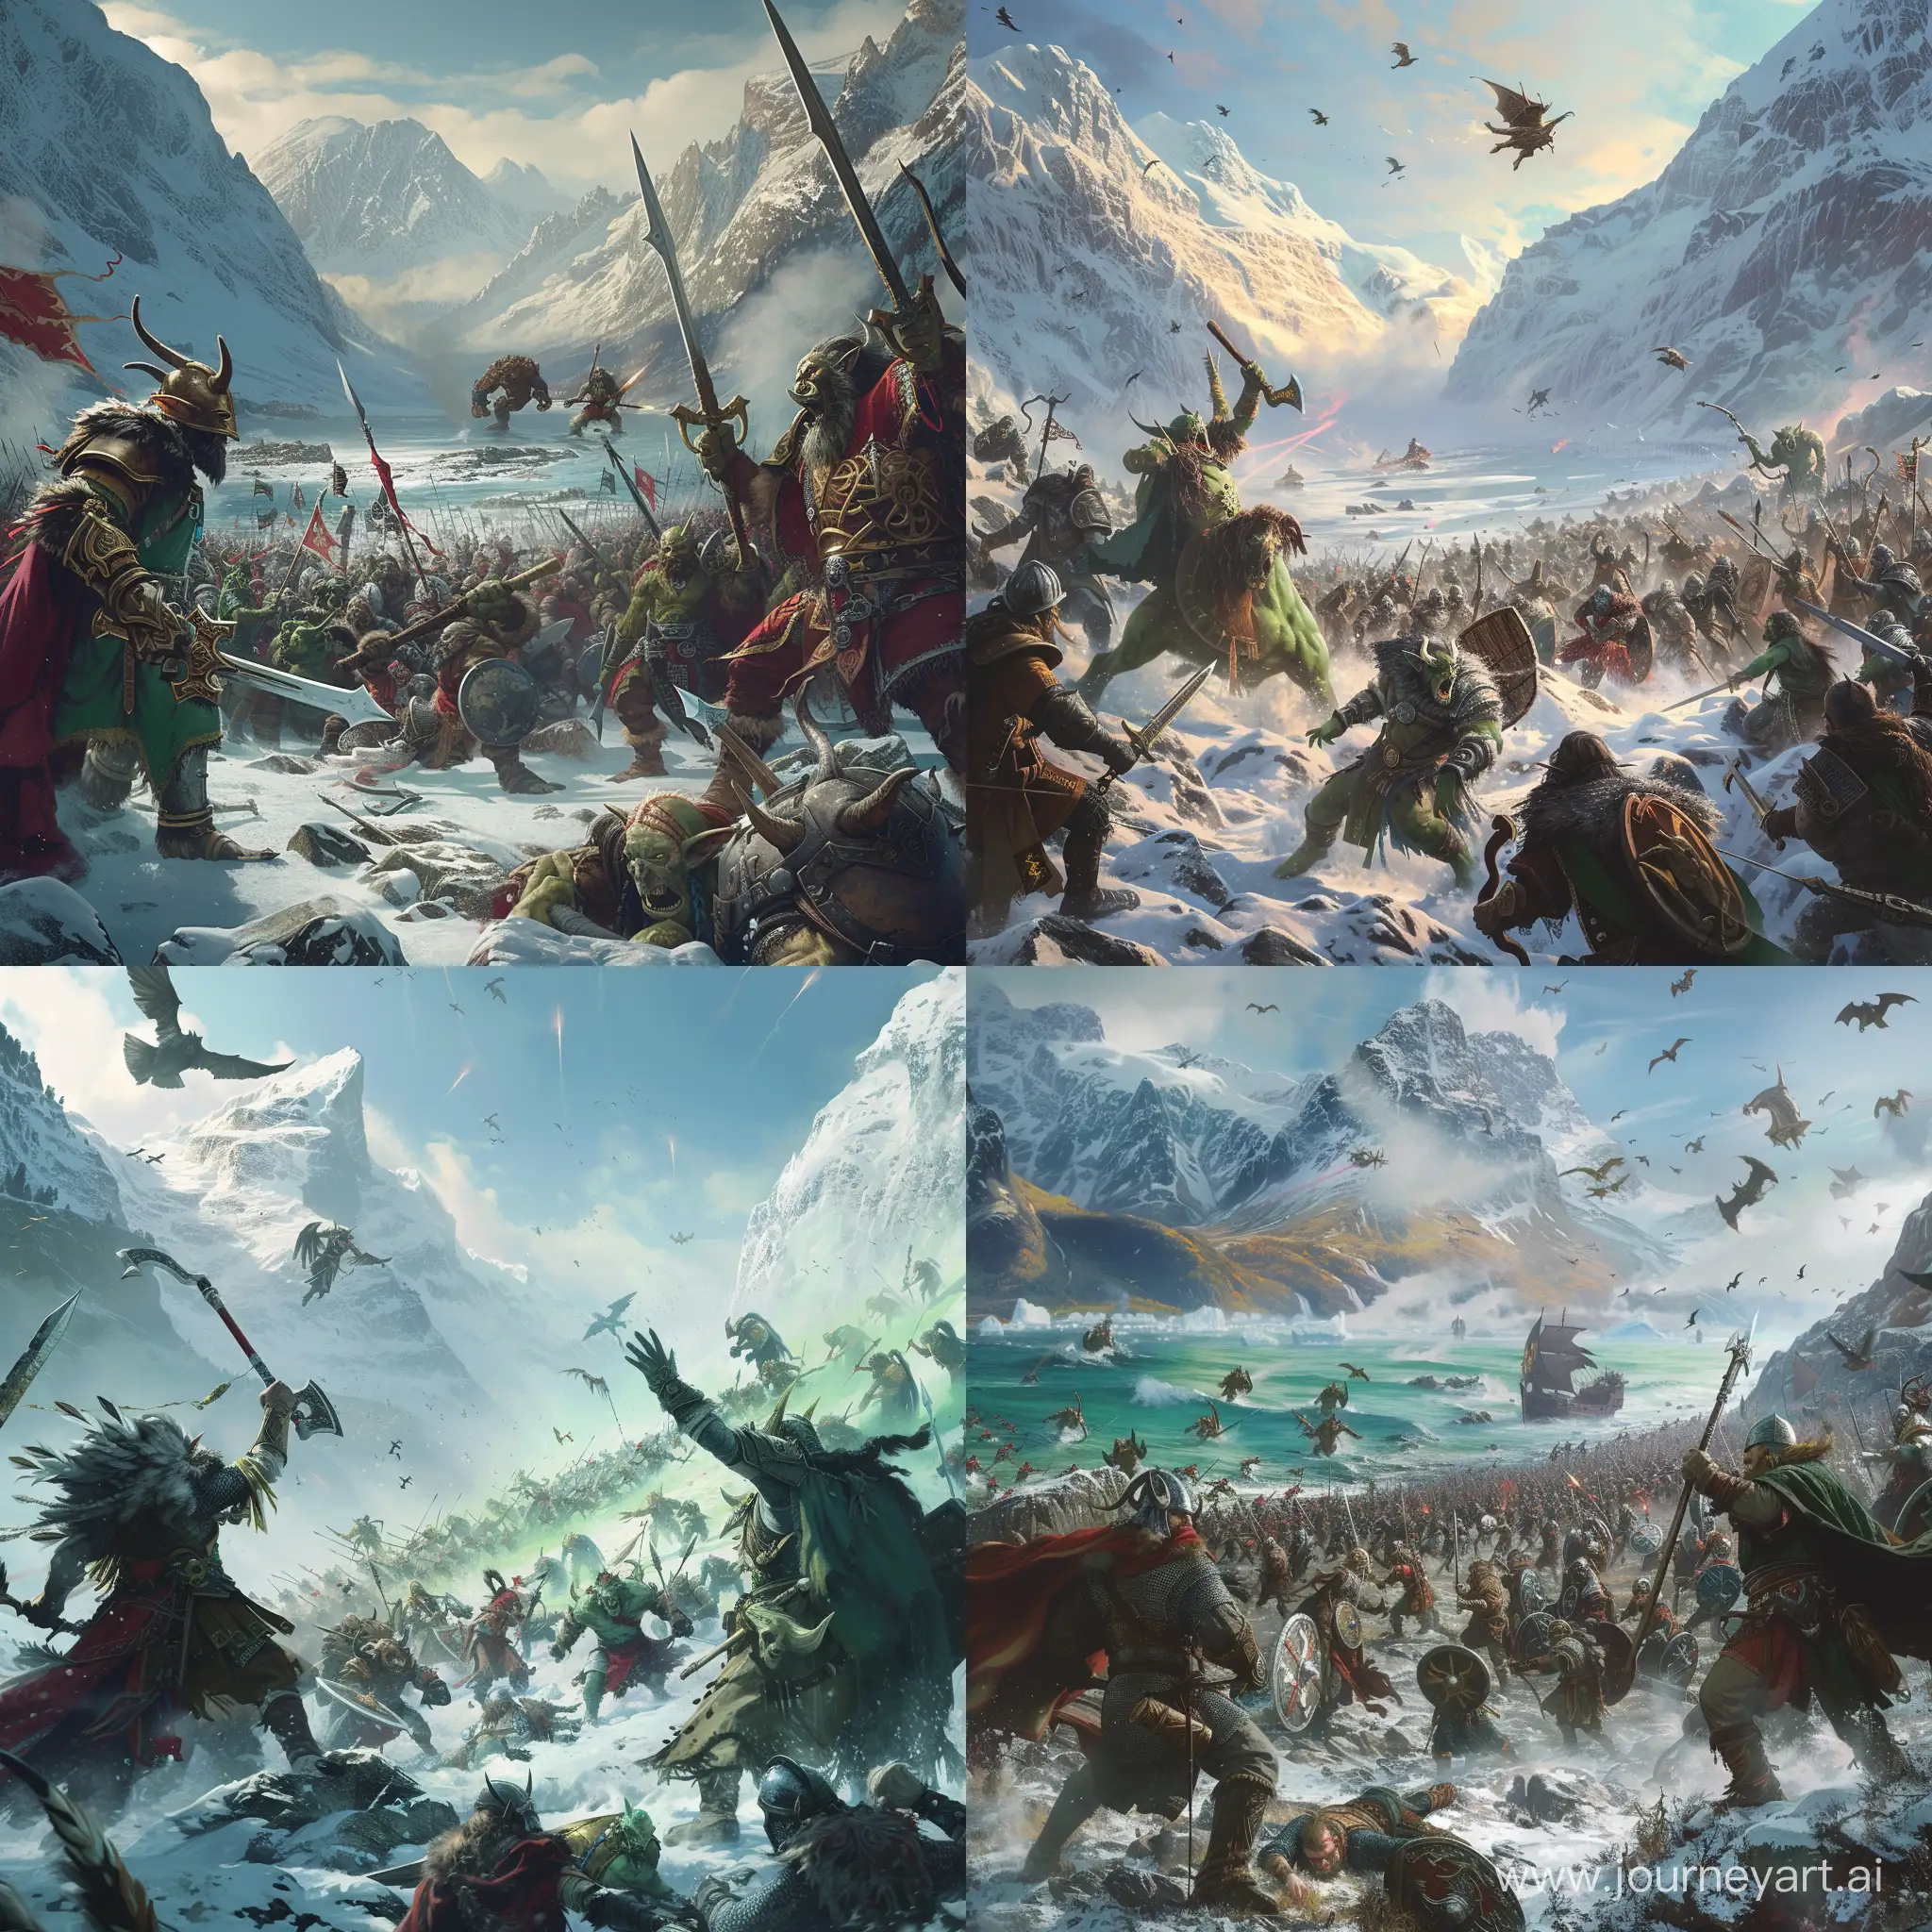 Epic-Battle-between-Elves-and-Orcs-in-Northern-Fiords-Fantasy-Scene